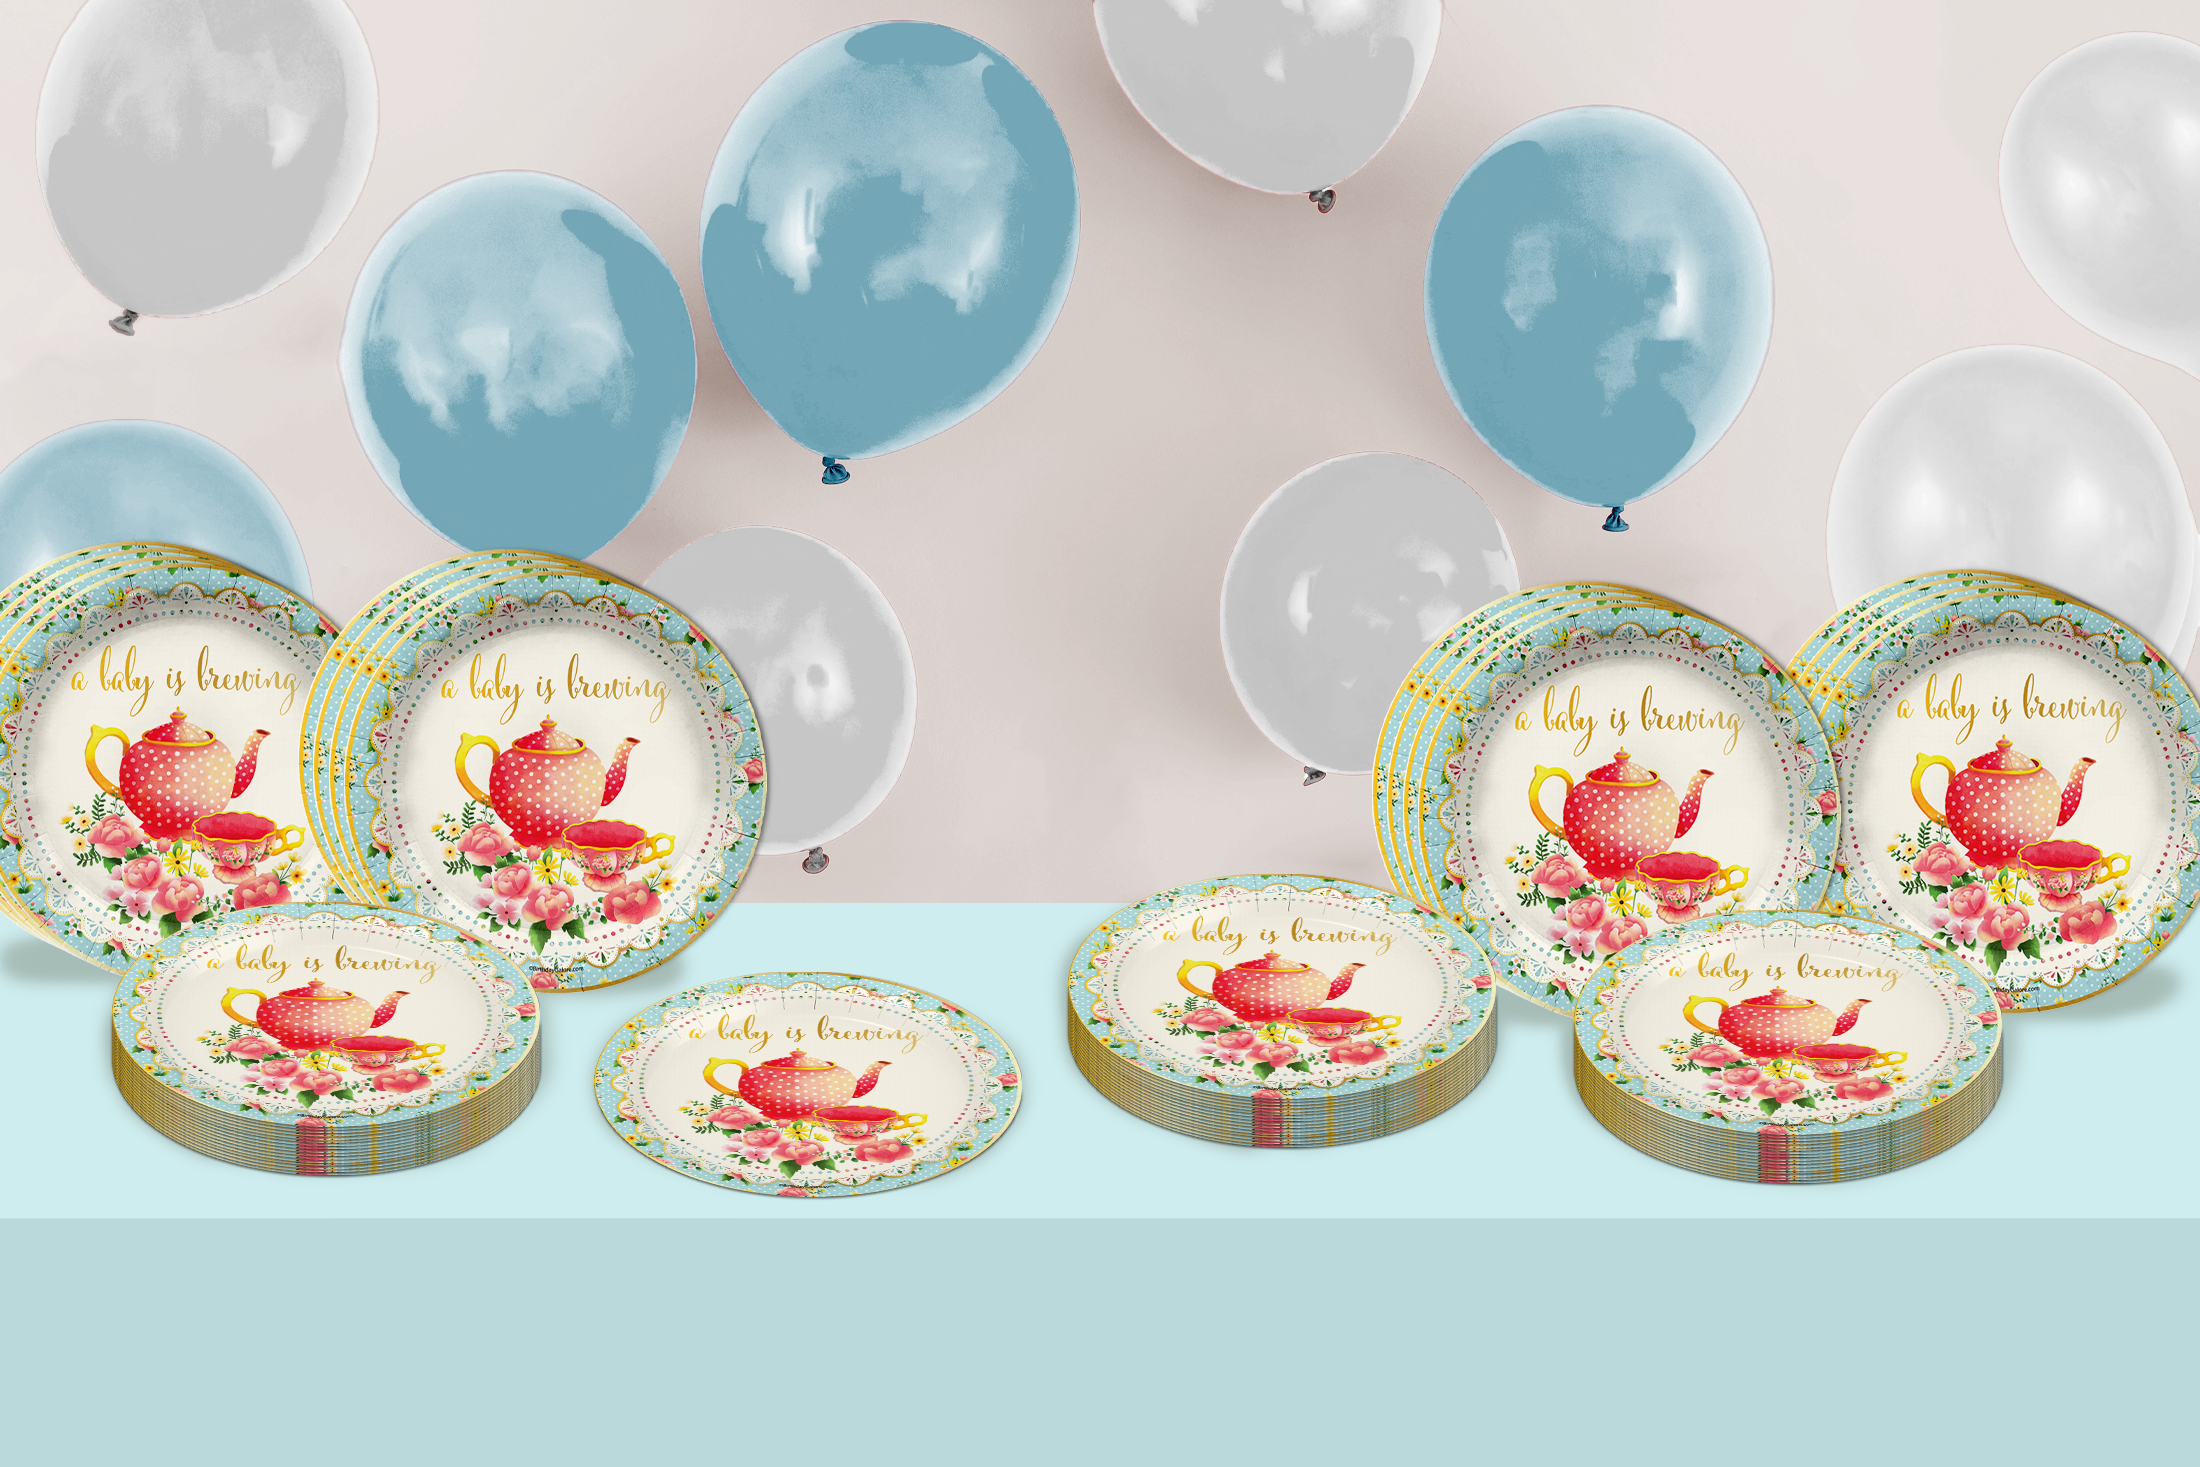 A Baby is Brewing Tea Baby Shower Party Supplies Large 9" Paper Plates in Bulk 32 Piece